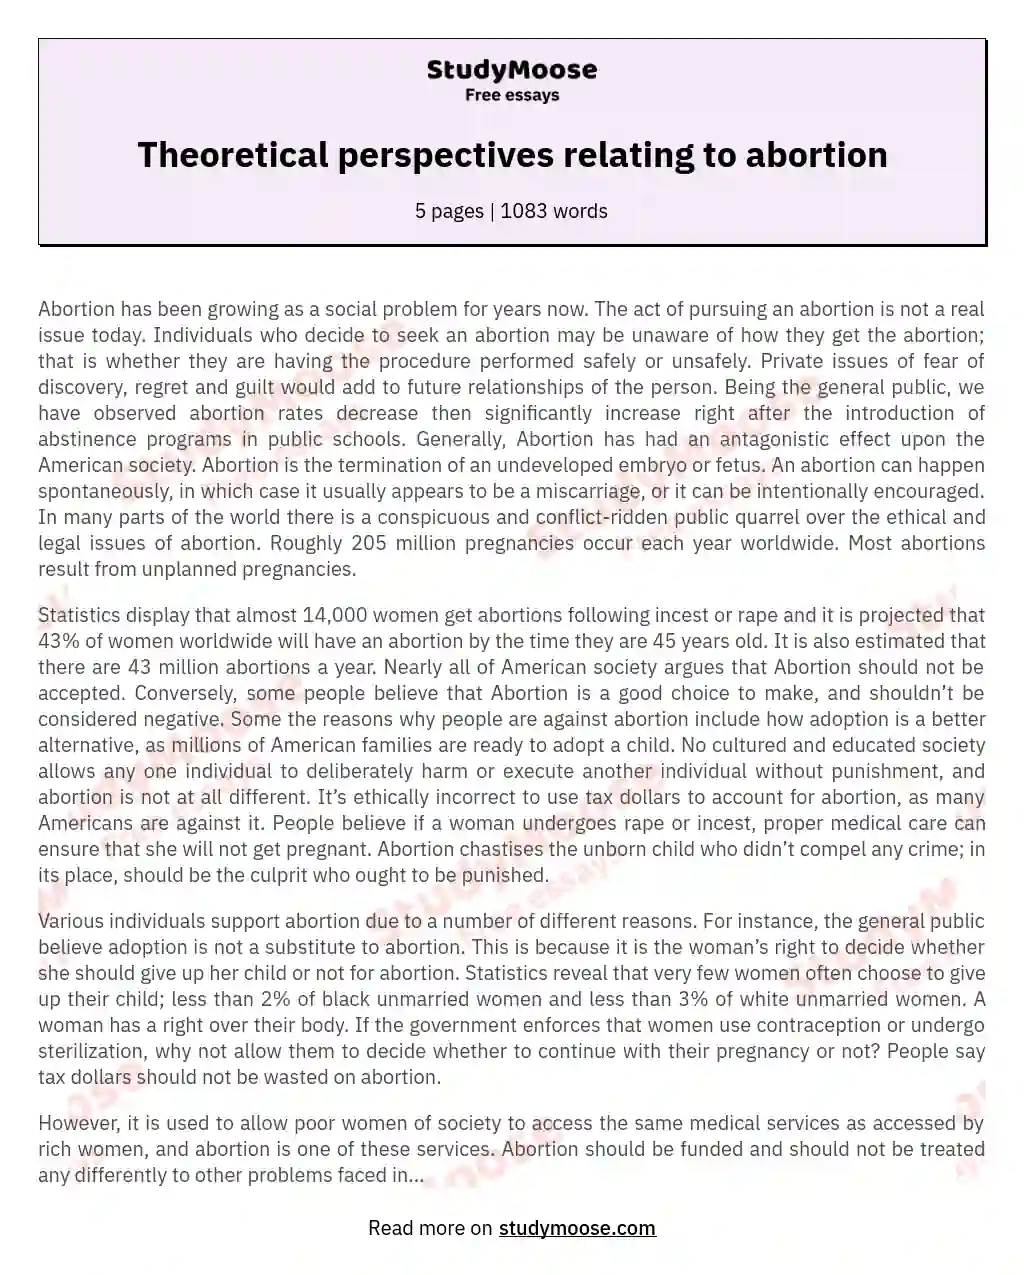 Theoretical perspectives relating to abortion essay